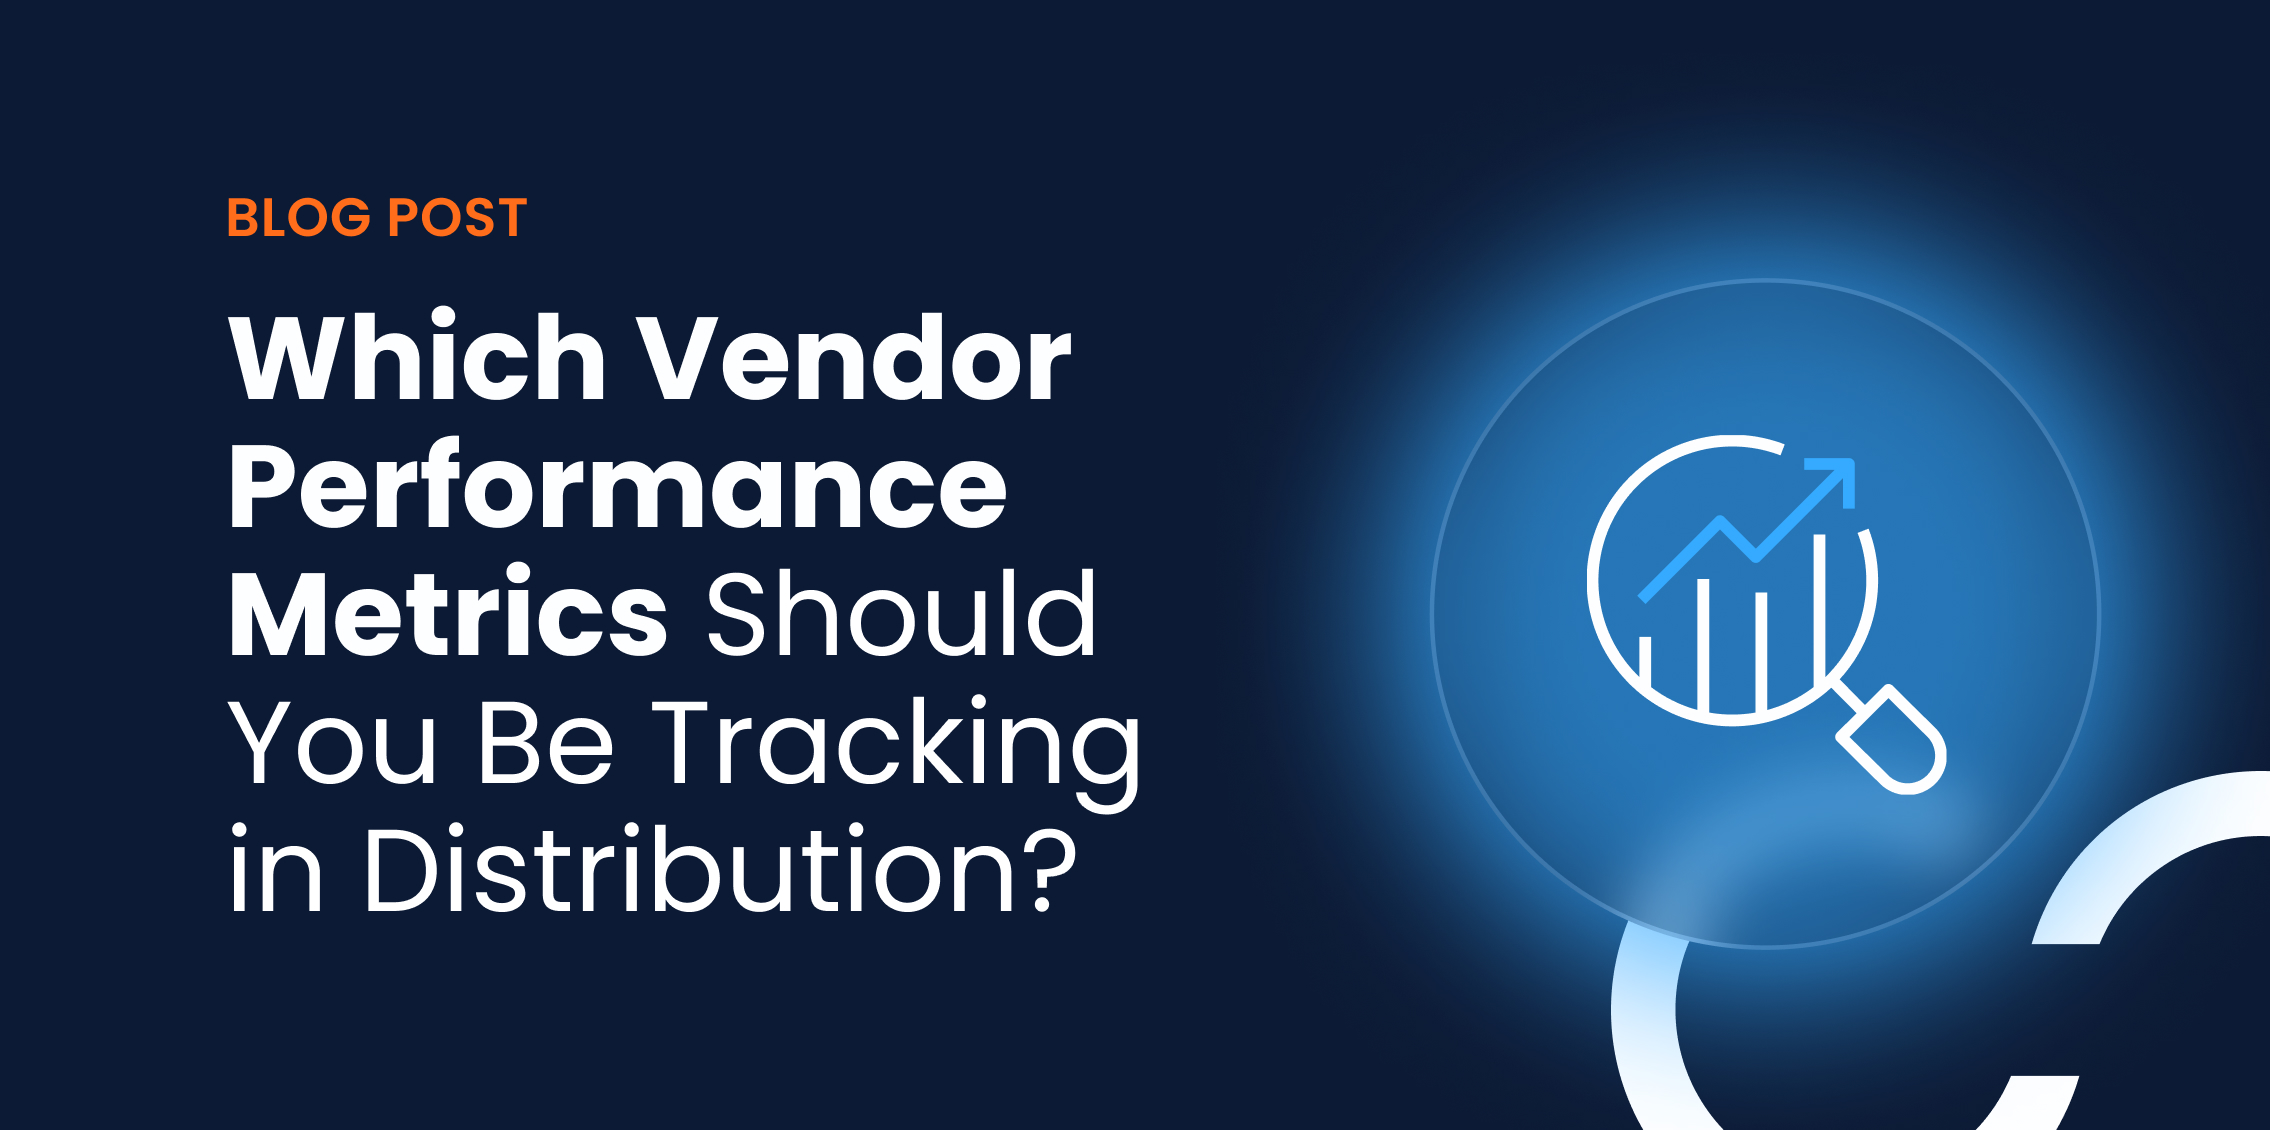 a crm can help distributors evaluate vendor performance and put the right vendor performance metrics to action